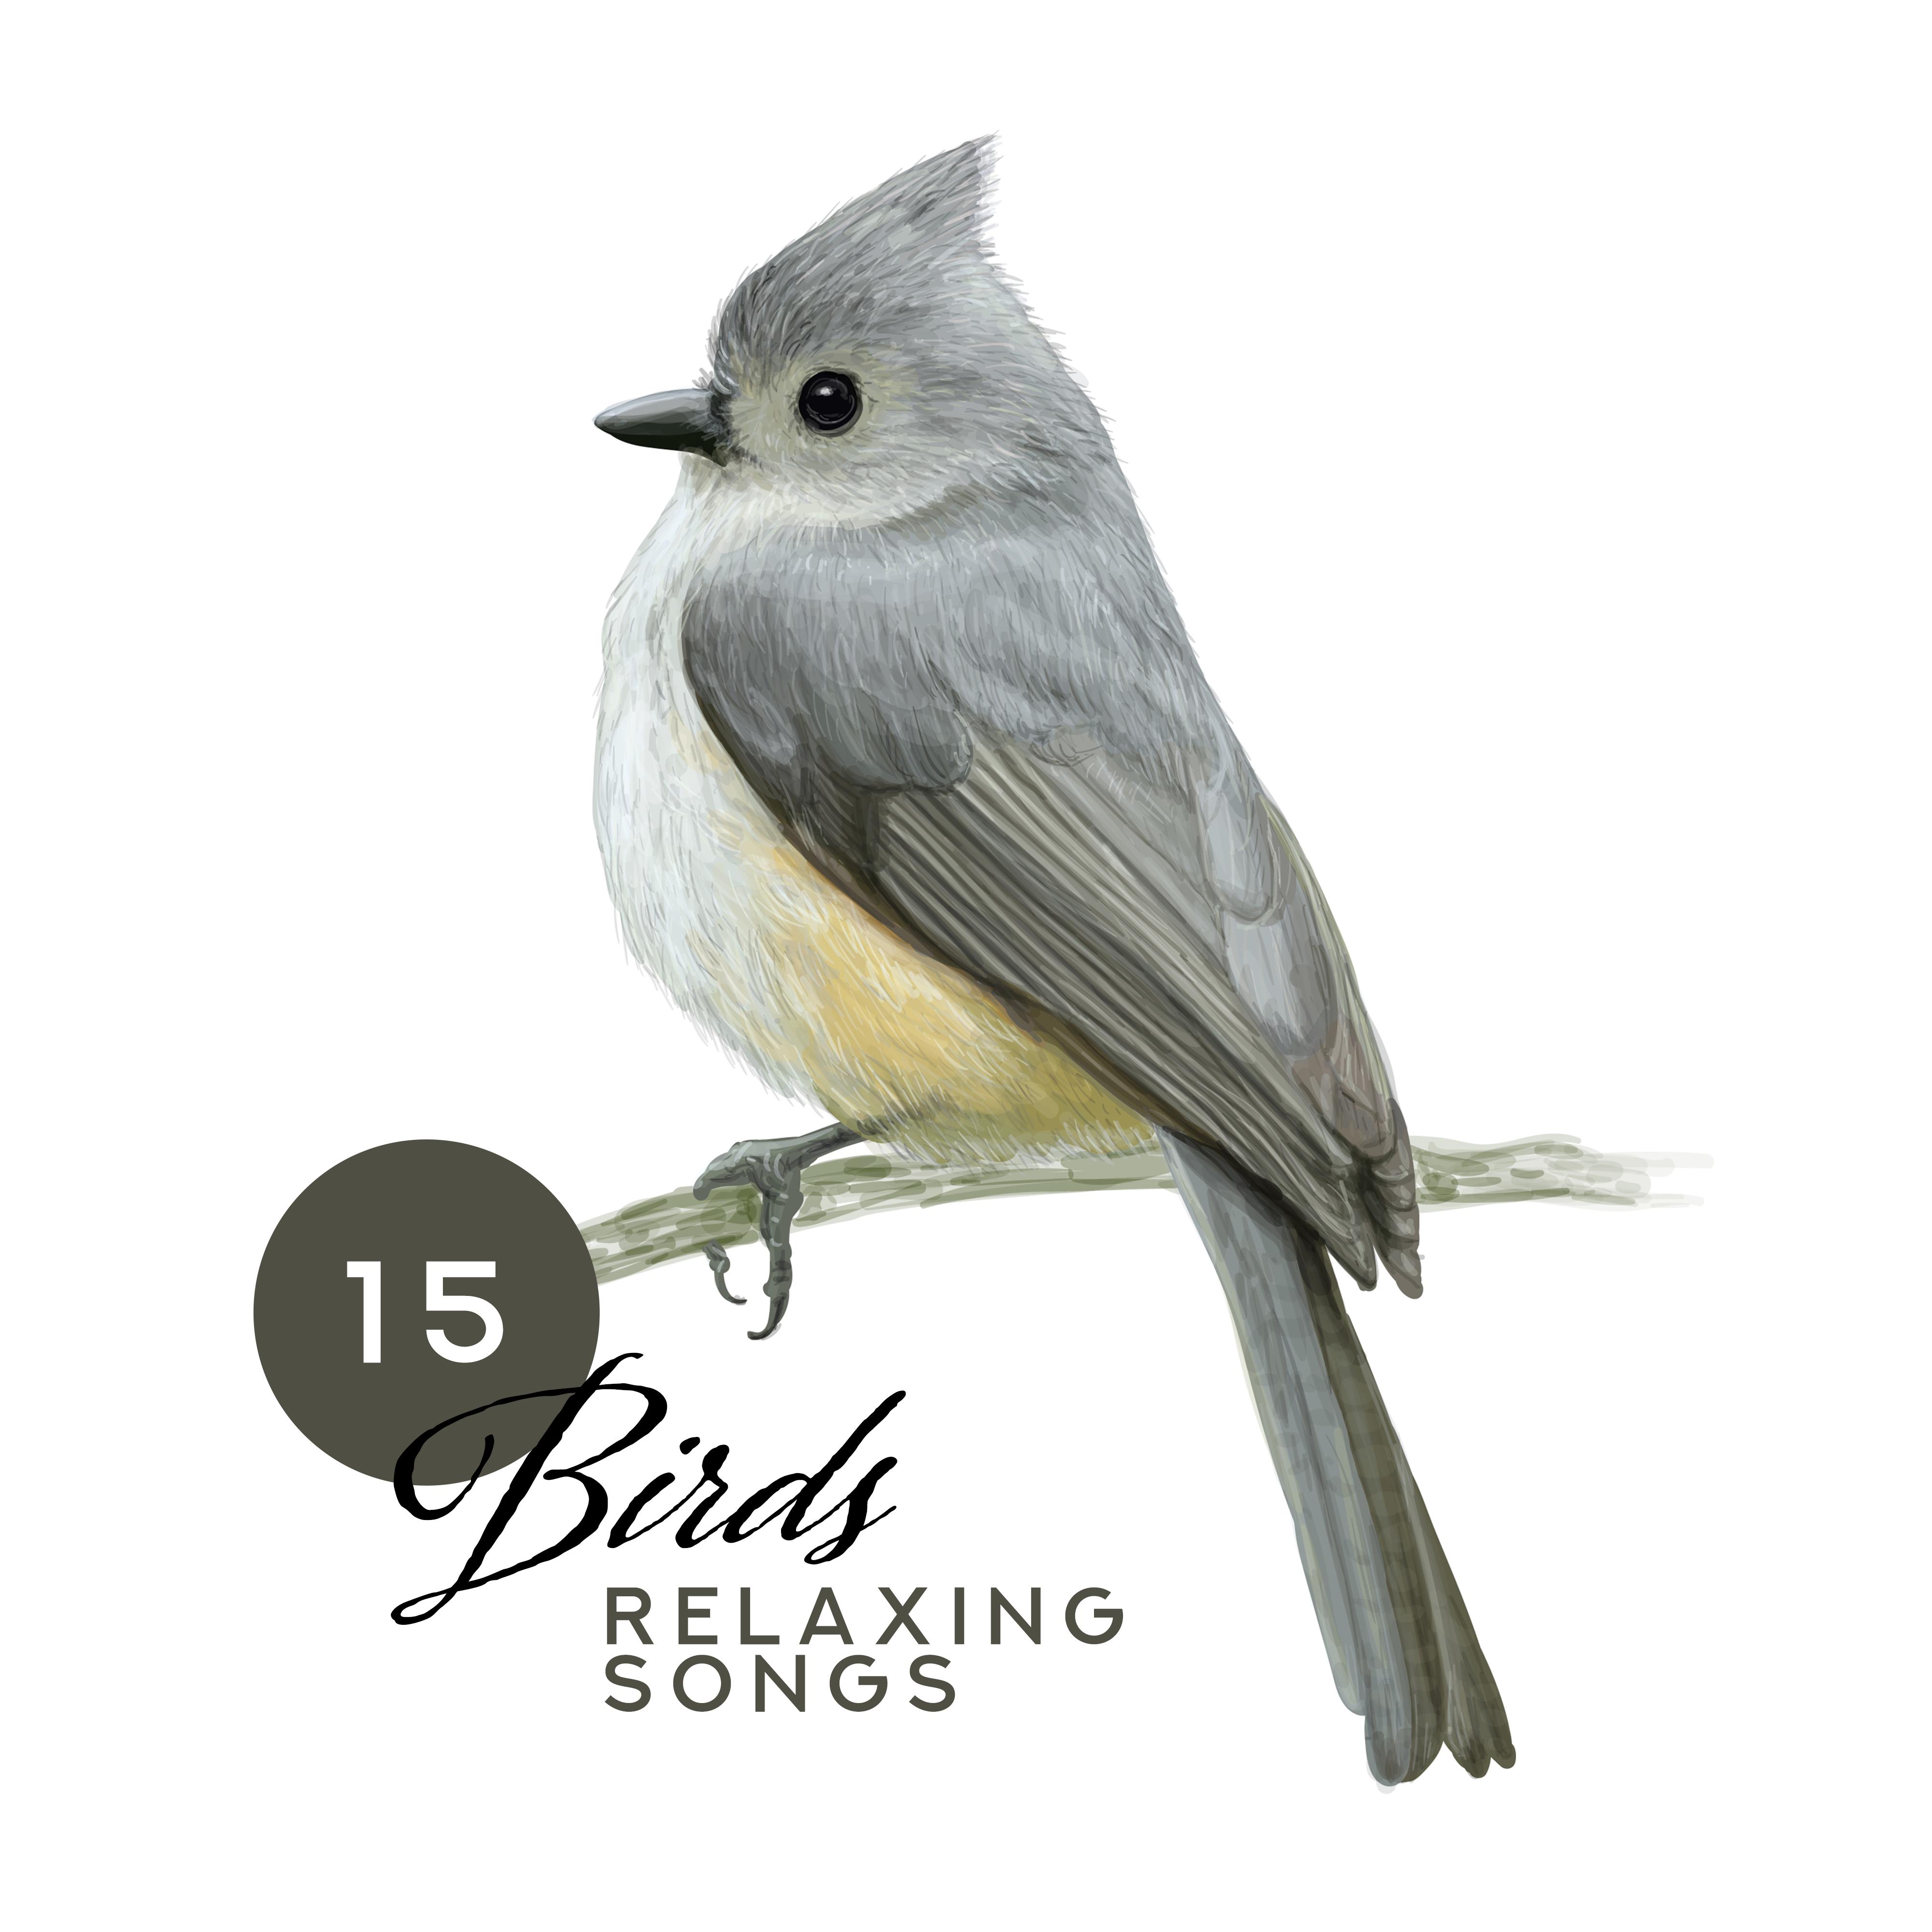 15 Birds Relaxing Songs: New Age Ambient Nature Music 2019, Songs for Total Relax at Home or Spa, Beautiful Sounds of Birds, Forest, Wind & Other, Soothing Melodies Played on Guitar & Piano